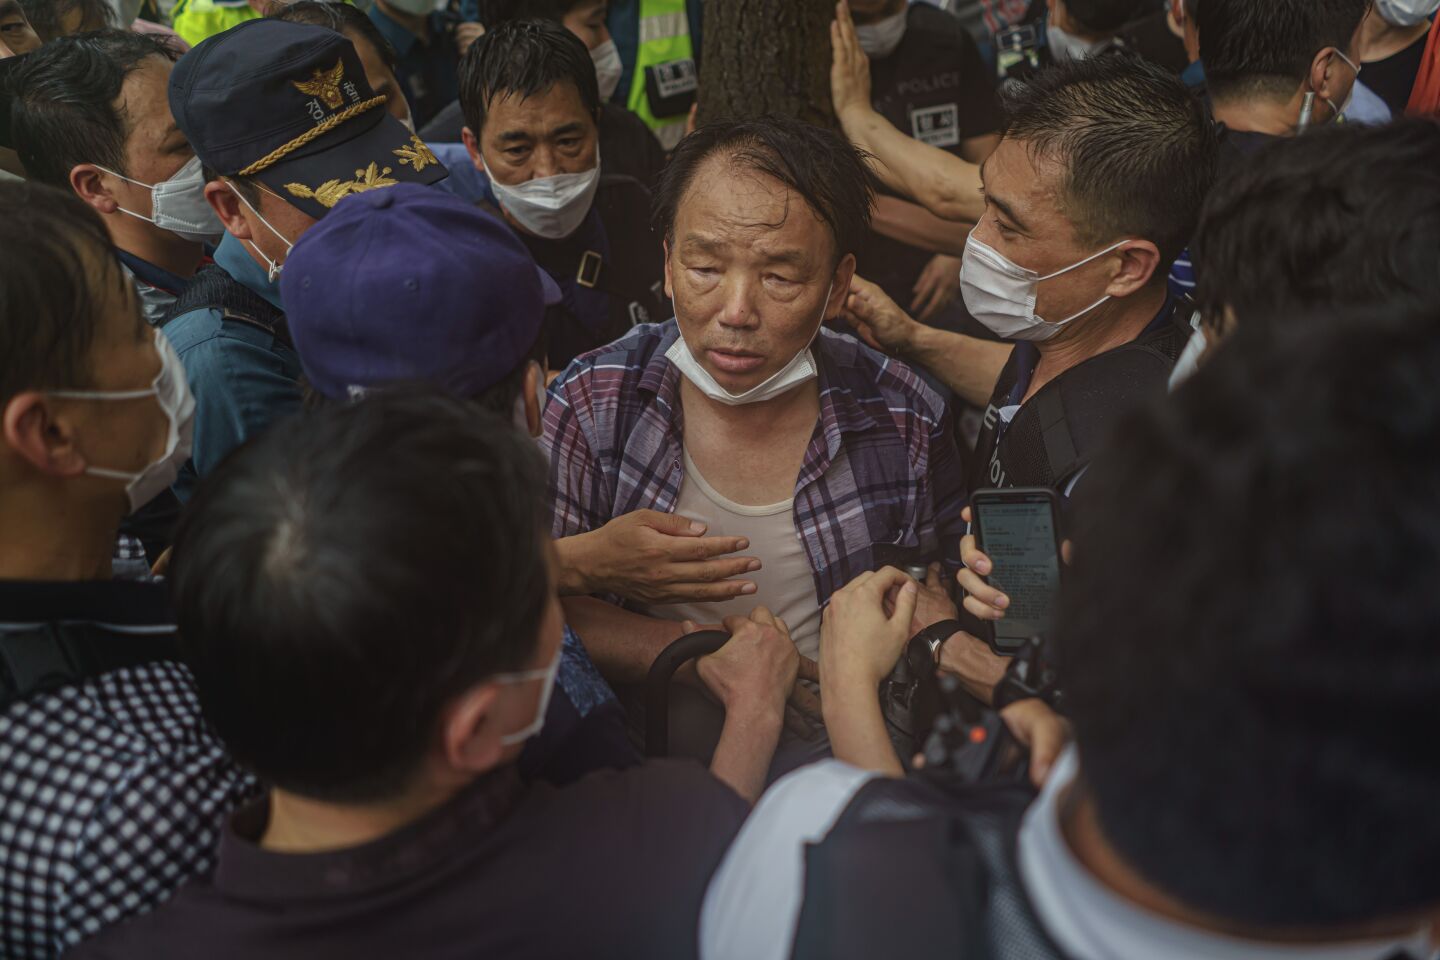 A protester is surrounded by police officers.